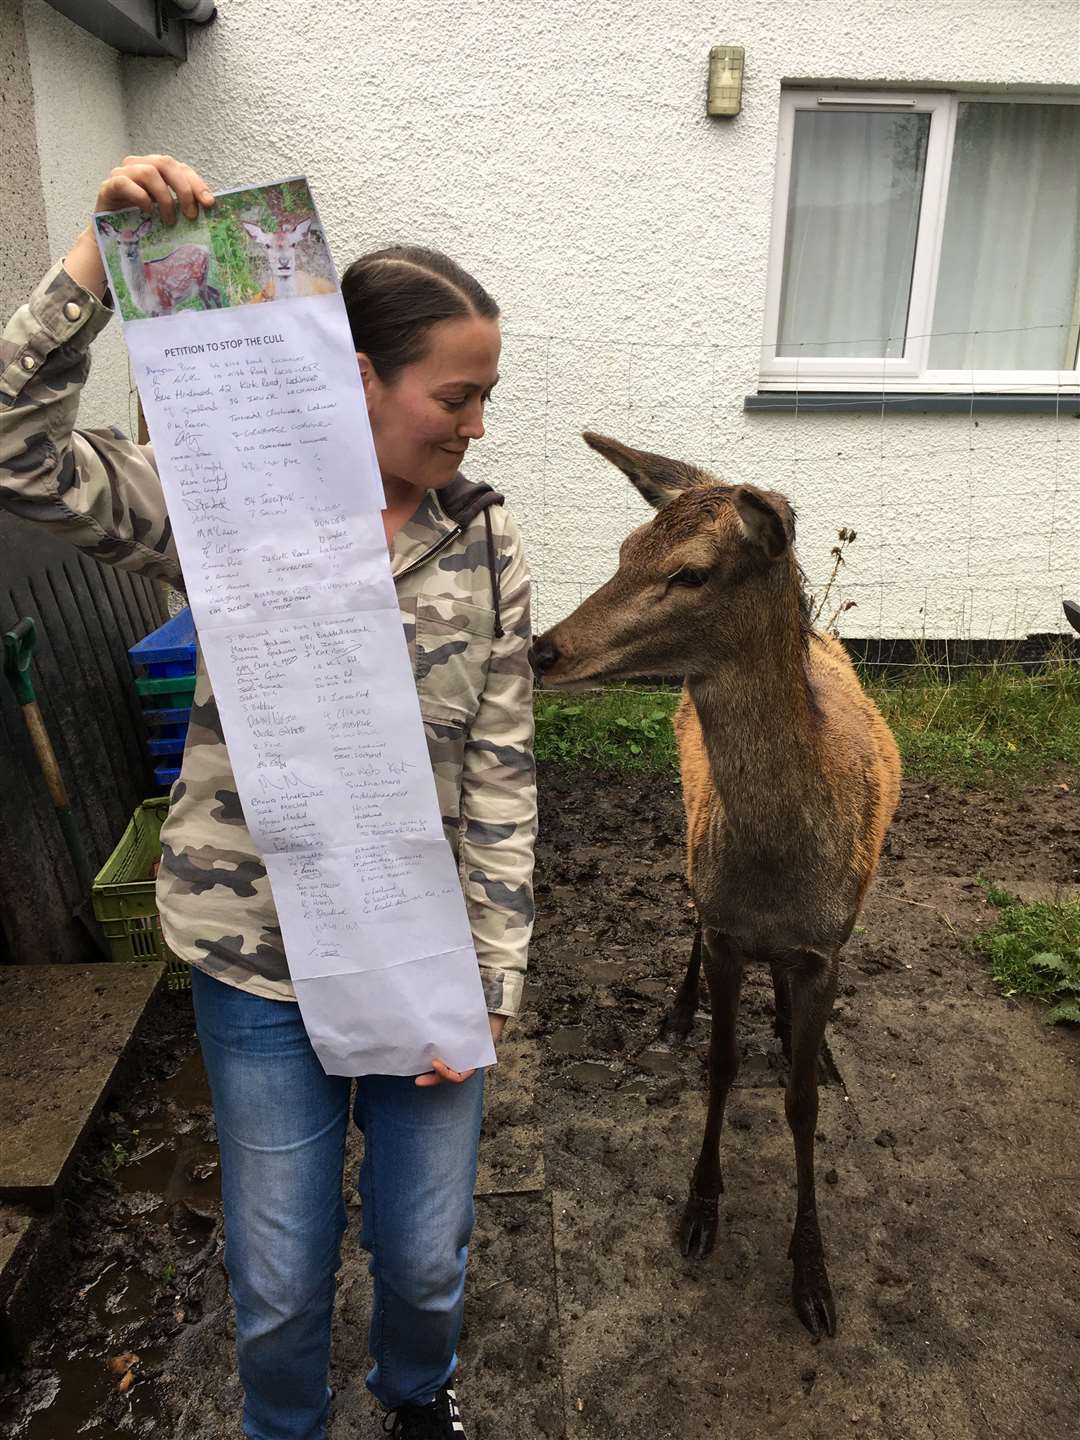 Deer have become commonplace wandering round Lochinver. Here one looks on as Angela Pirie holds up her petition.